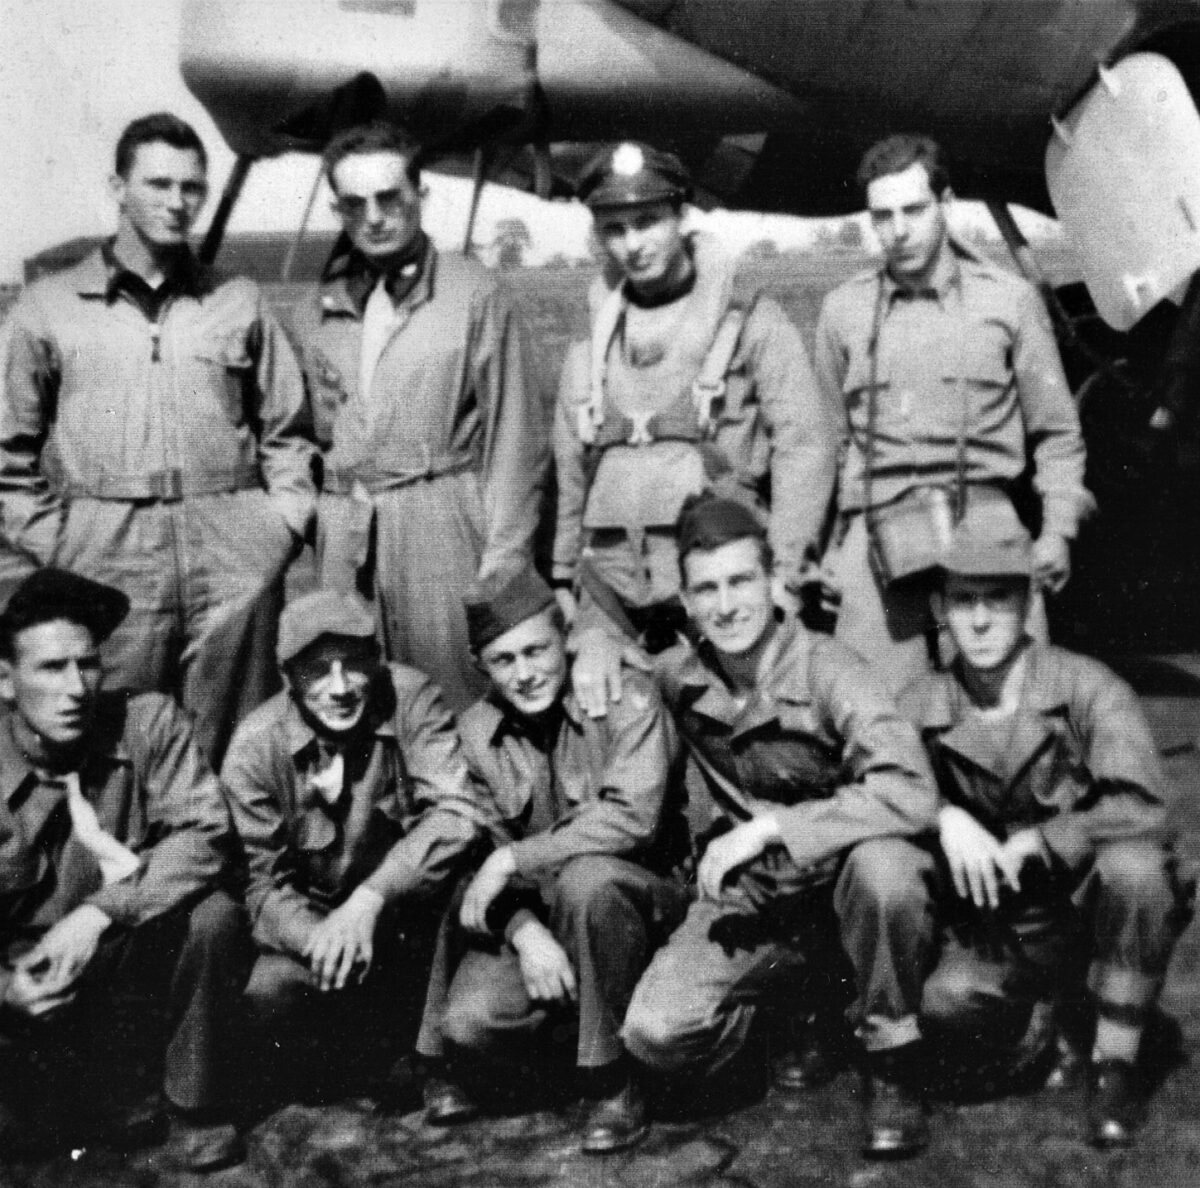 The crew of Goldsticker’s plane, Deuces Wild, photographed in January 1944 at McDill Field, Tampa, Florida, before being deployed overseas. Front row (left to right): Albert Fazzone (radio); James Fulmer (ball turret); J.R. Wadkins (engineer/top turret); Clayton Chapman (waist gunner). Back row: Joe Antol (pilot); Martin Atkin (co-pilot); Harry Ladanye (navigator); Ralph Goldsticker (bombardier). Not in photo: Jimmie Fogarty (tail gunner). 